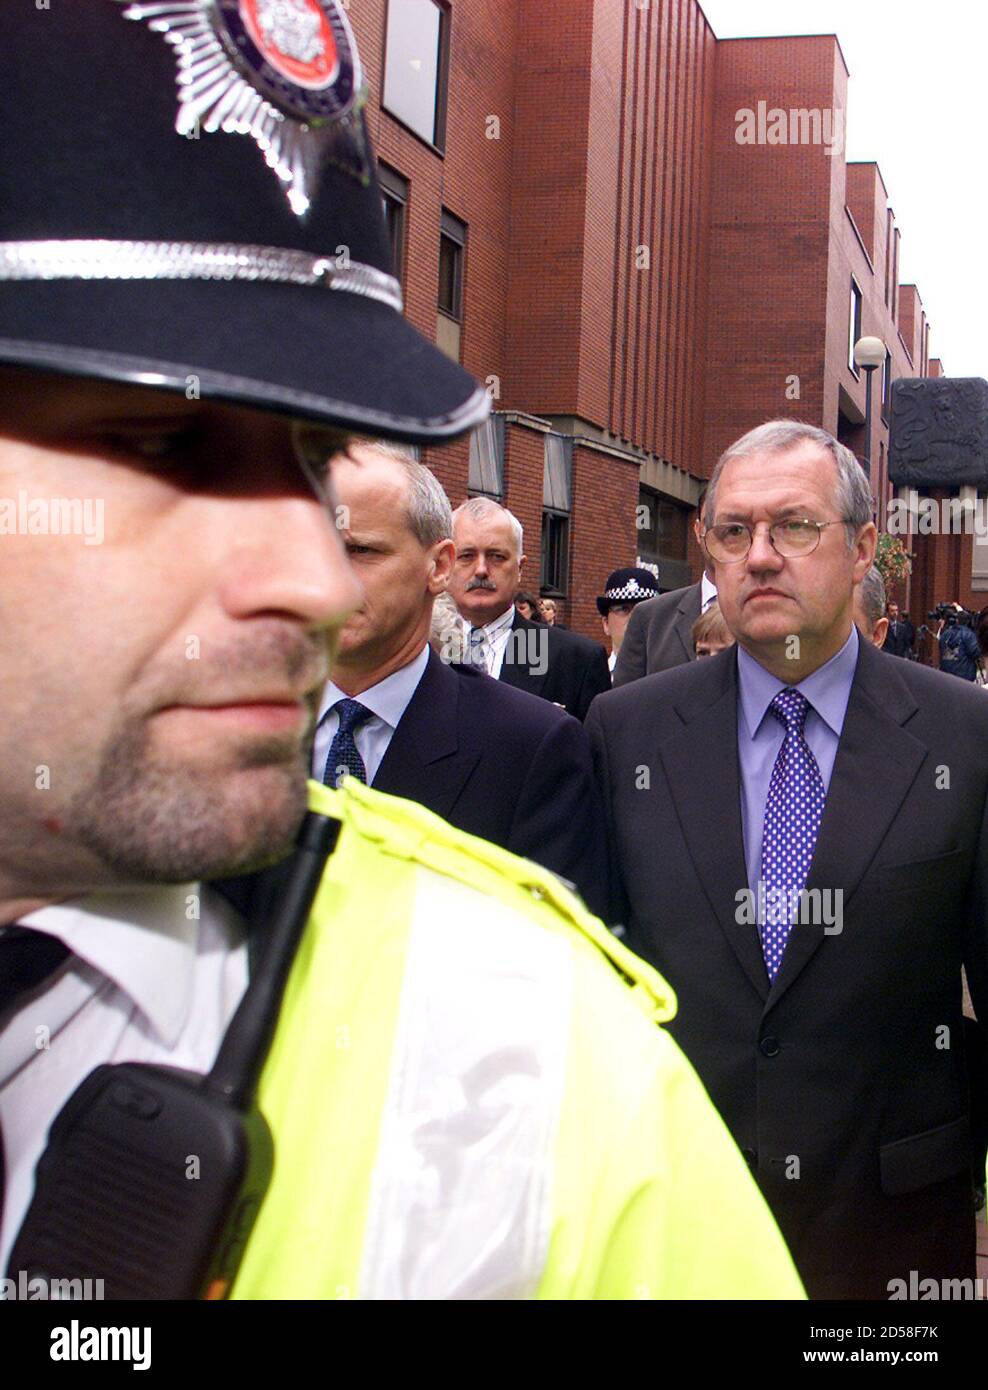 Former South Yorkshire Police Chief Superintendent David Duckinfield leaves court under police escort after the jury failed to reach a verdict at Leeds Crown Court July 24 2000. Former Chief Superintendant David Duckinfield was charged with manslaughter and wilful neglect of duty in the first criminal proceedings to follow the Hillsborough tragedy in which 96 Liverpool soccer fans were crushed to death at the 1989 FA Cup Semi final.  DC/WS Stock Photo